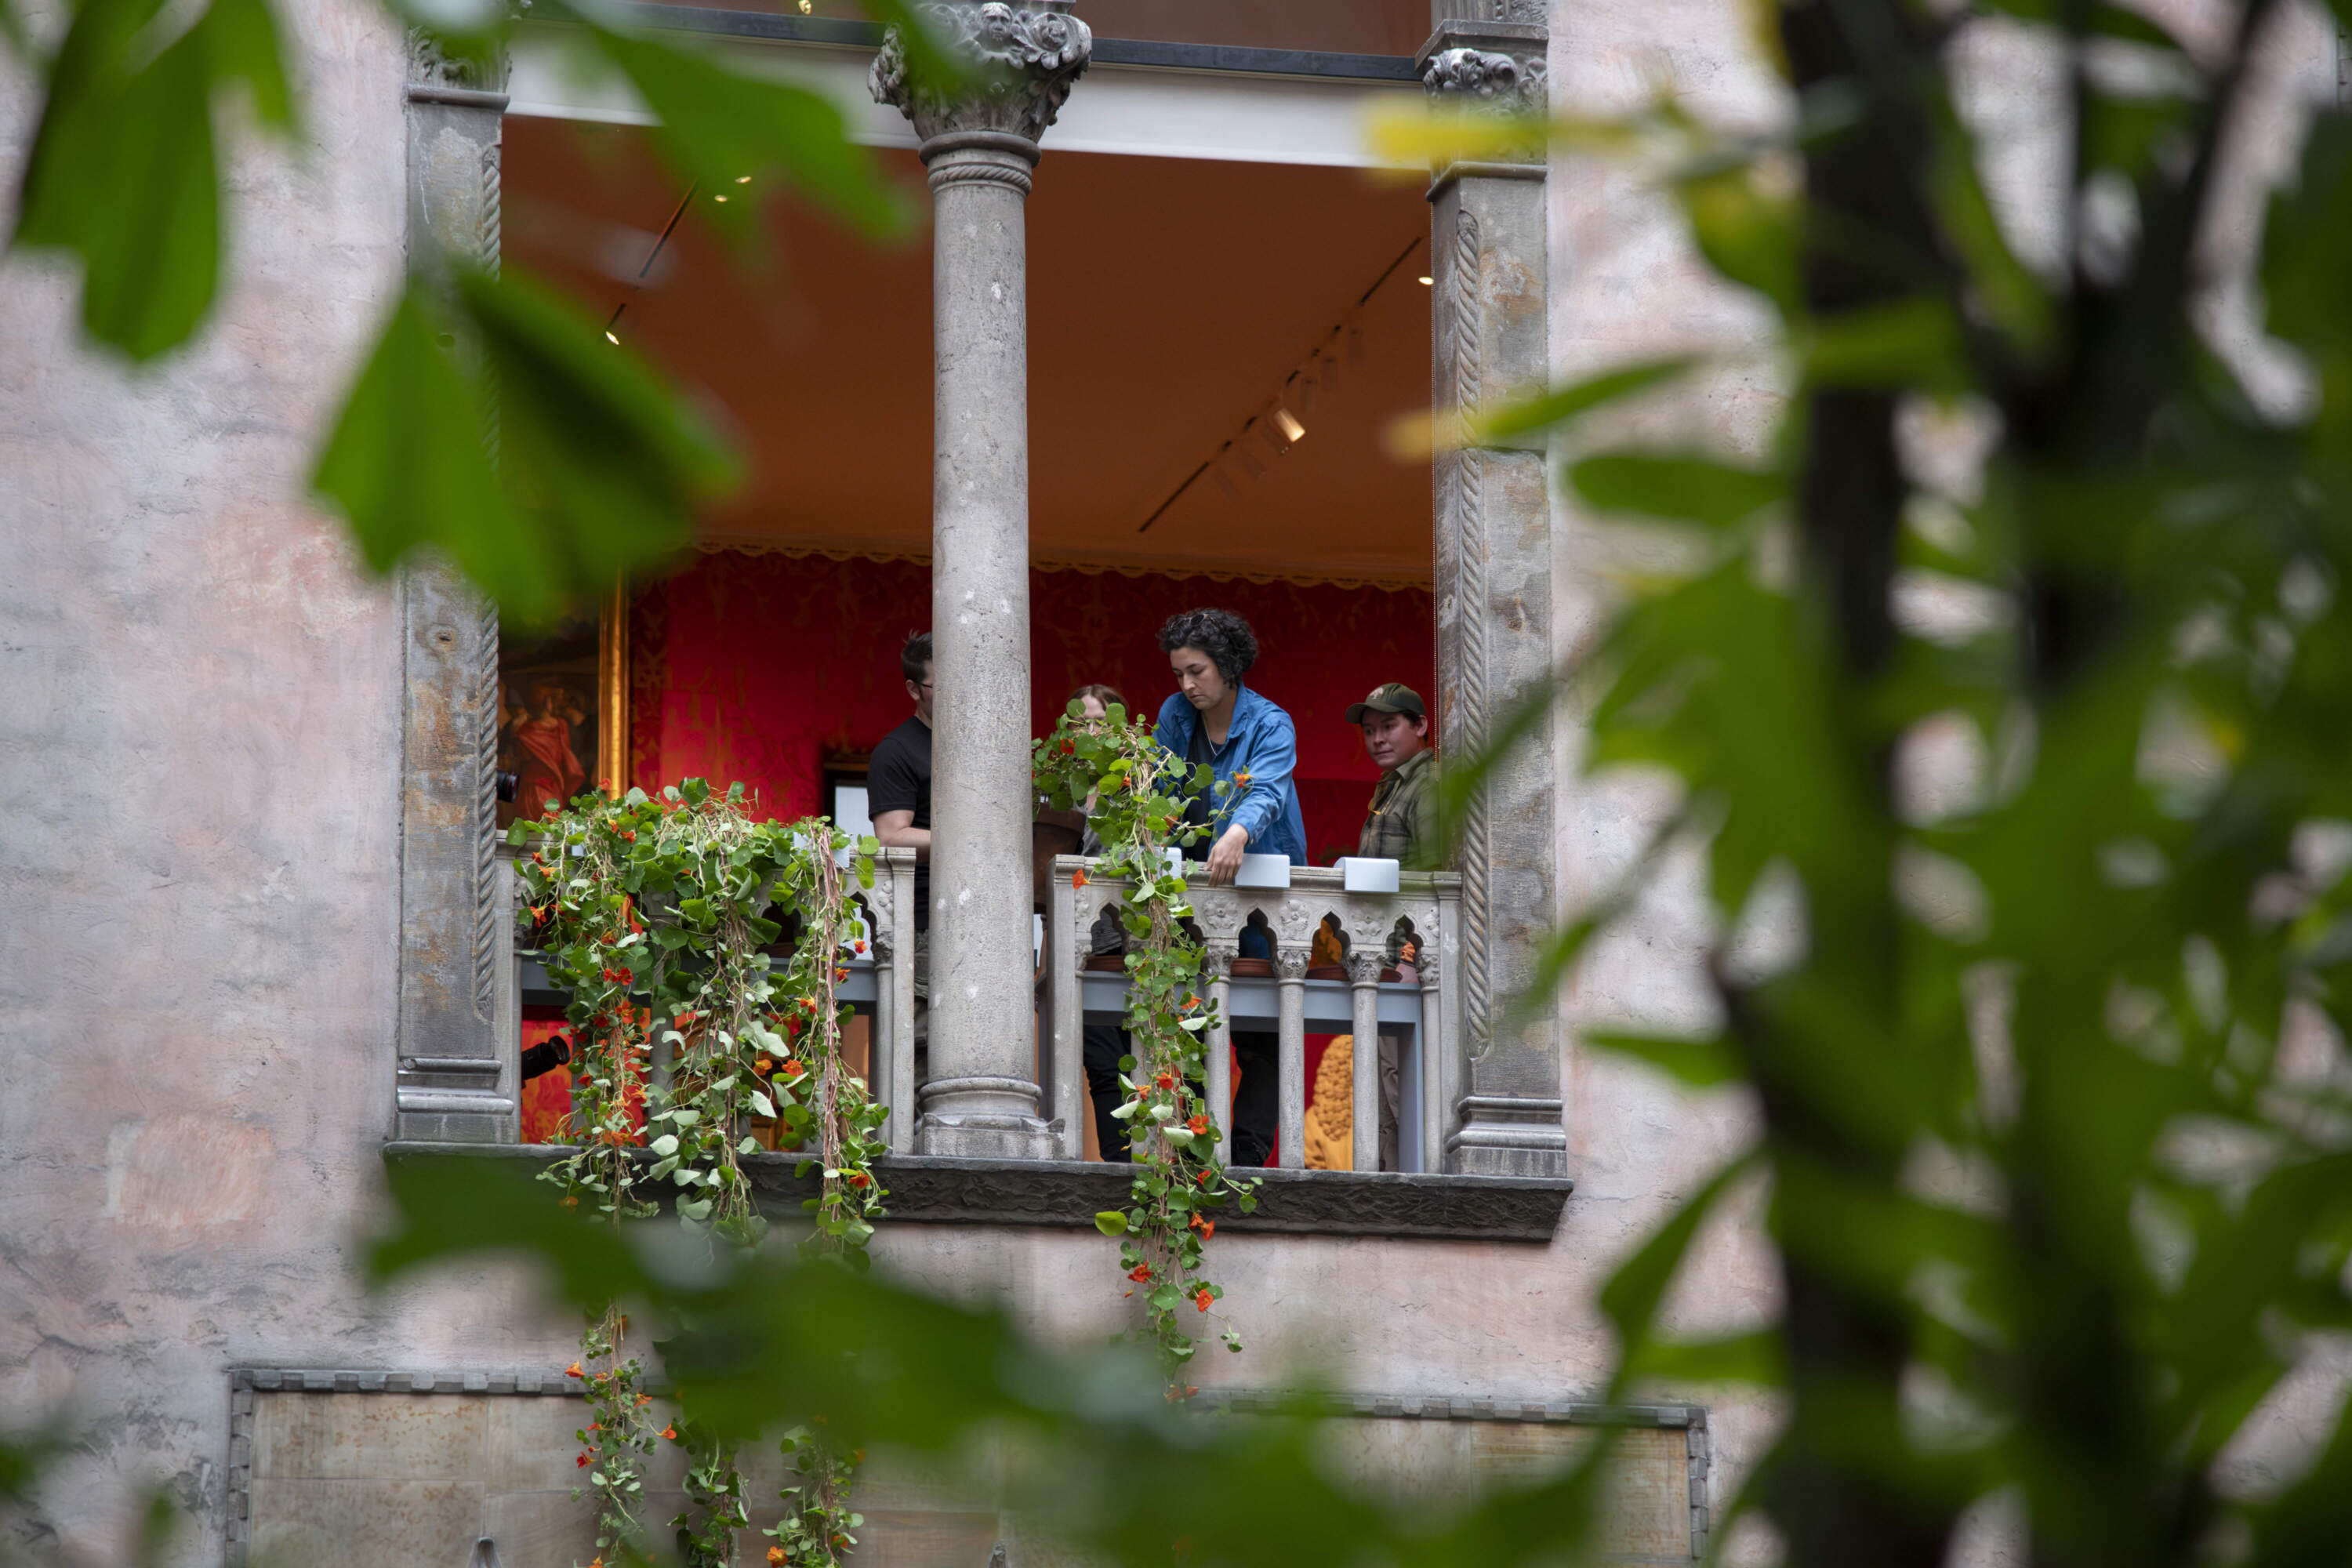 Rumbley and volunteers drape nasturtium vines out of the windows during the 2024 "Hanging Nasturtiums" display. (Photo courtesy of the Isabella Stewart Gardner Museum)